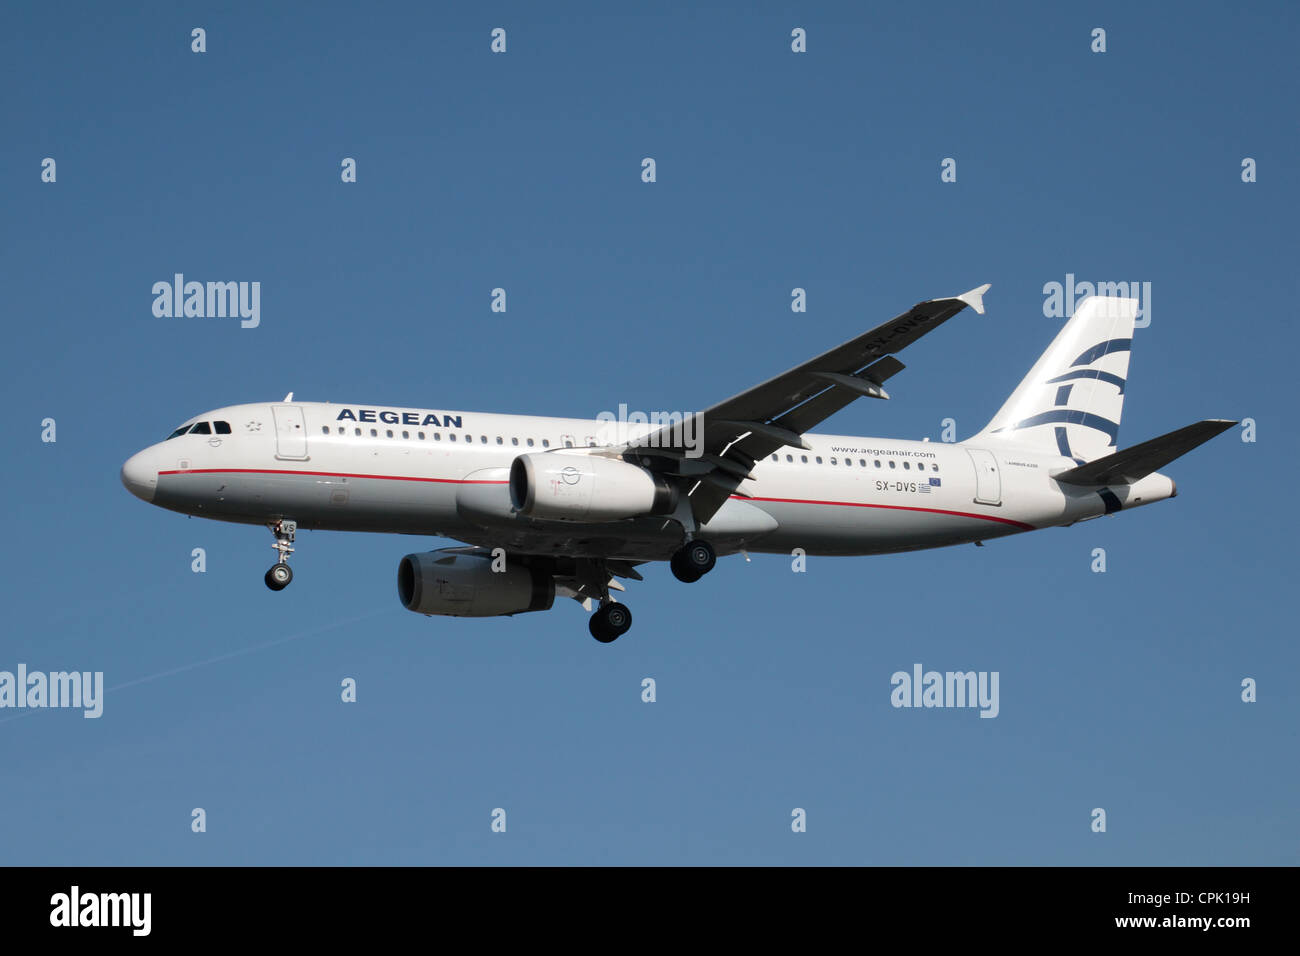 The Aegean Airlines Airbus A320-232 (SX-DVS) about to land at Heathrow Airport, London, UK. Feb 2012 Stock Photo